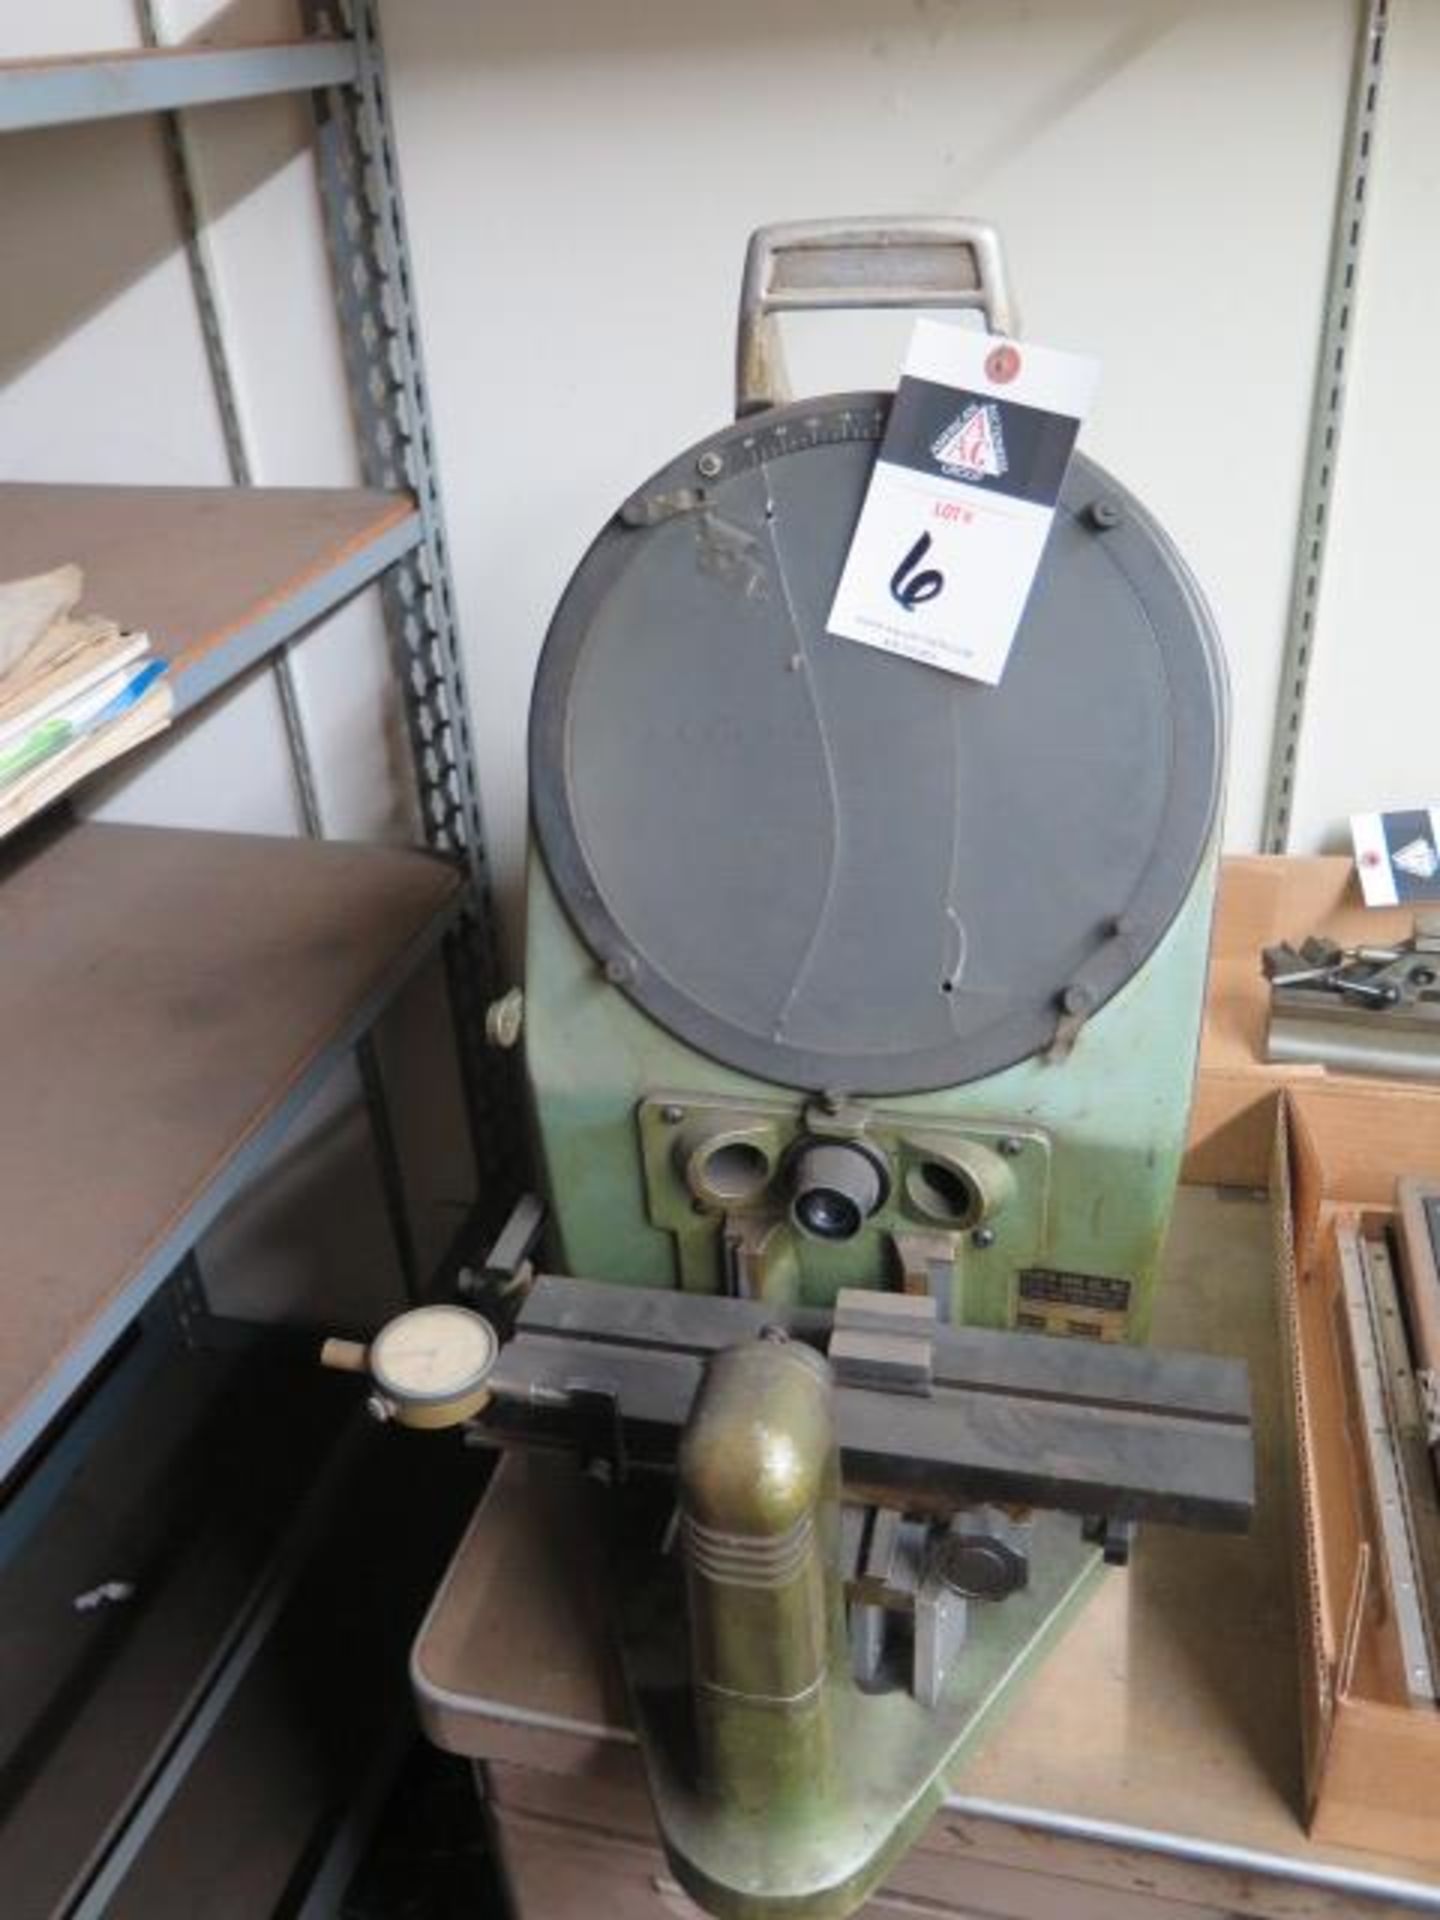 Pacific Gage mdl. 100 9" Optical Comparator (BROKEN LENS) (SOLD AS-IS - NO WARRANTY)